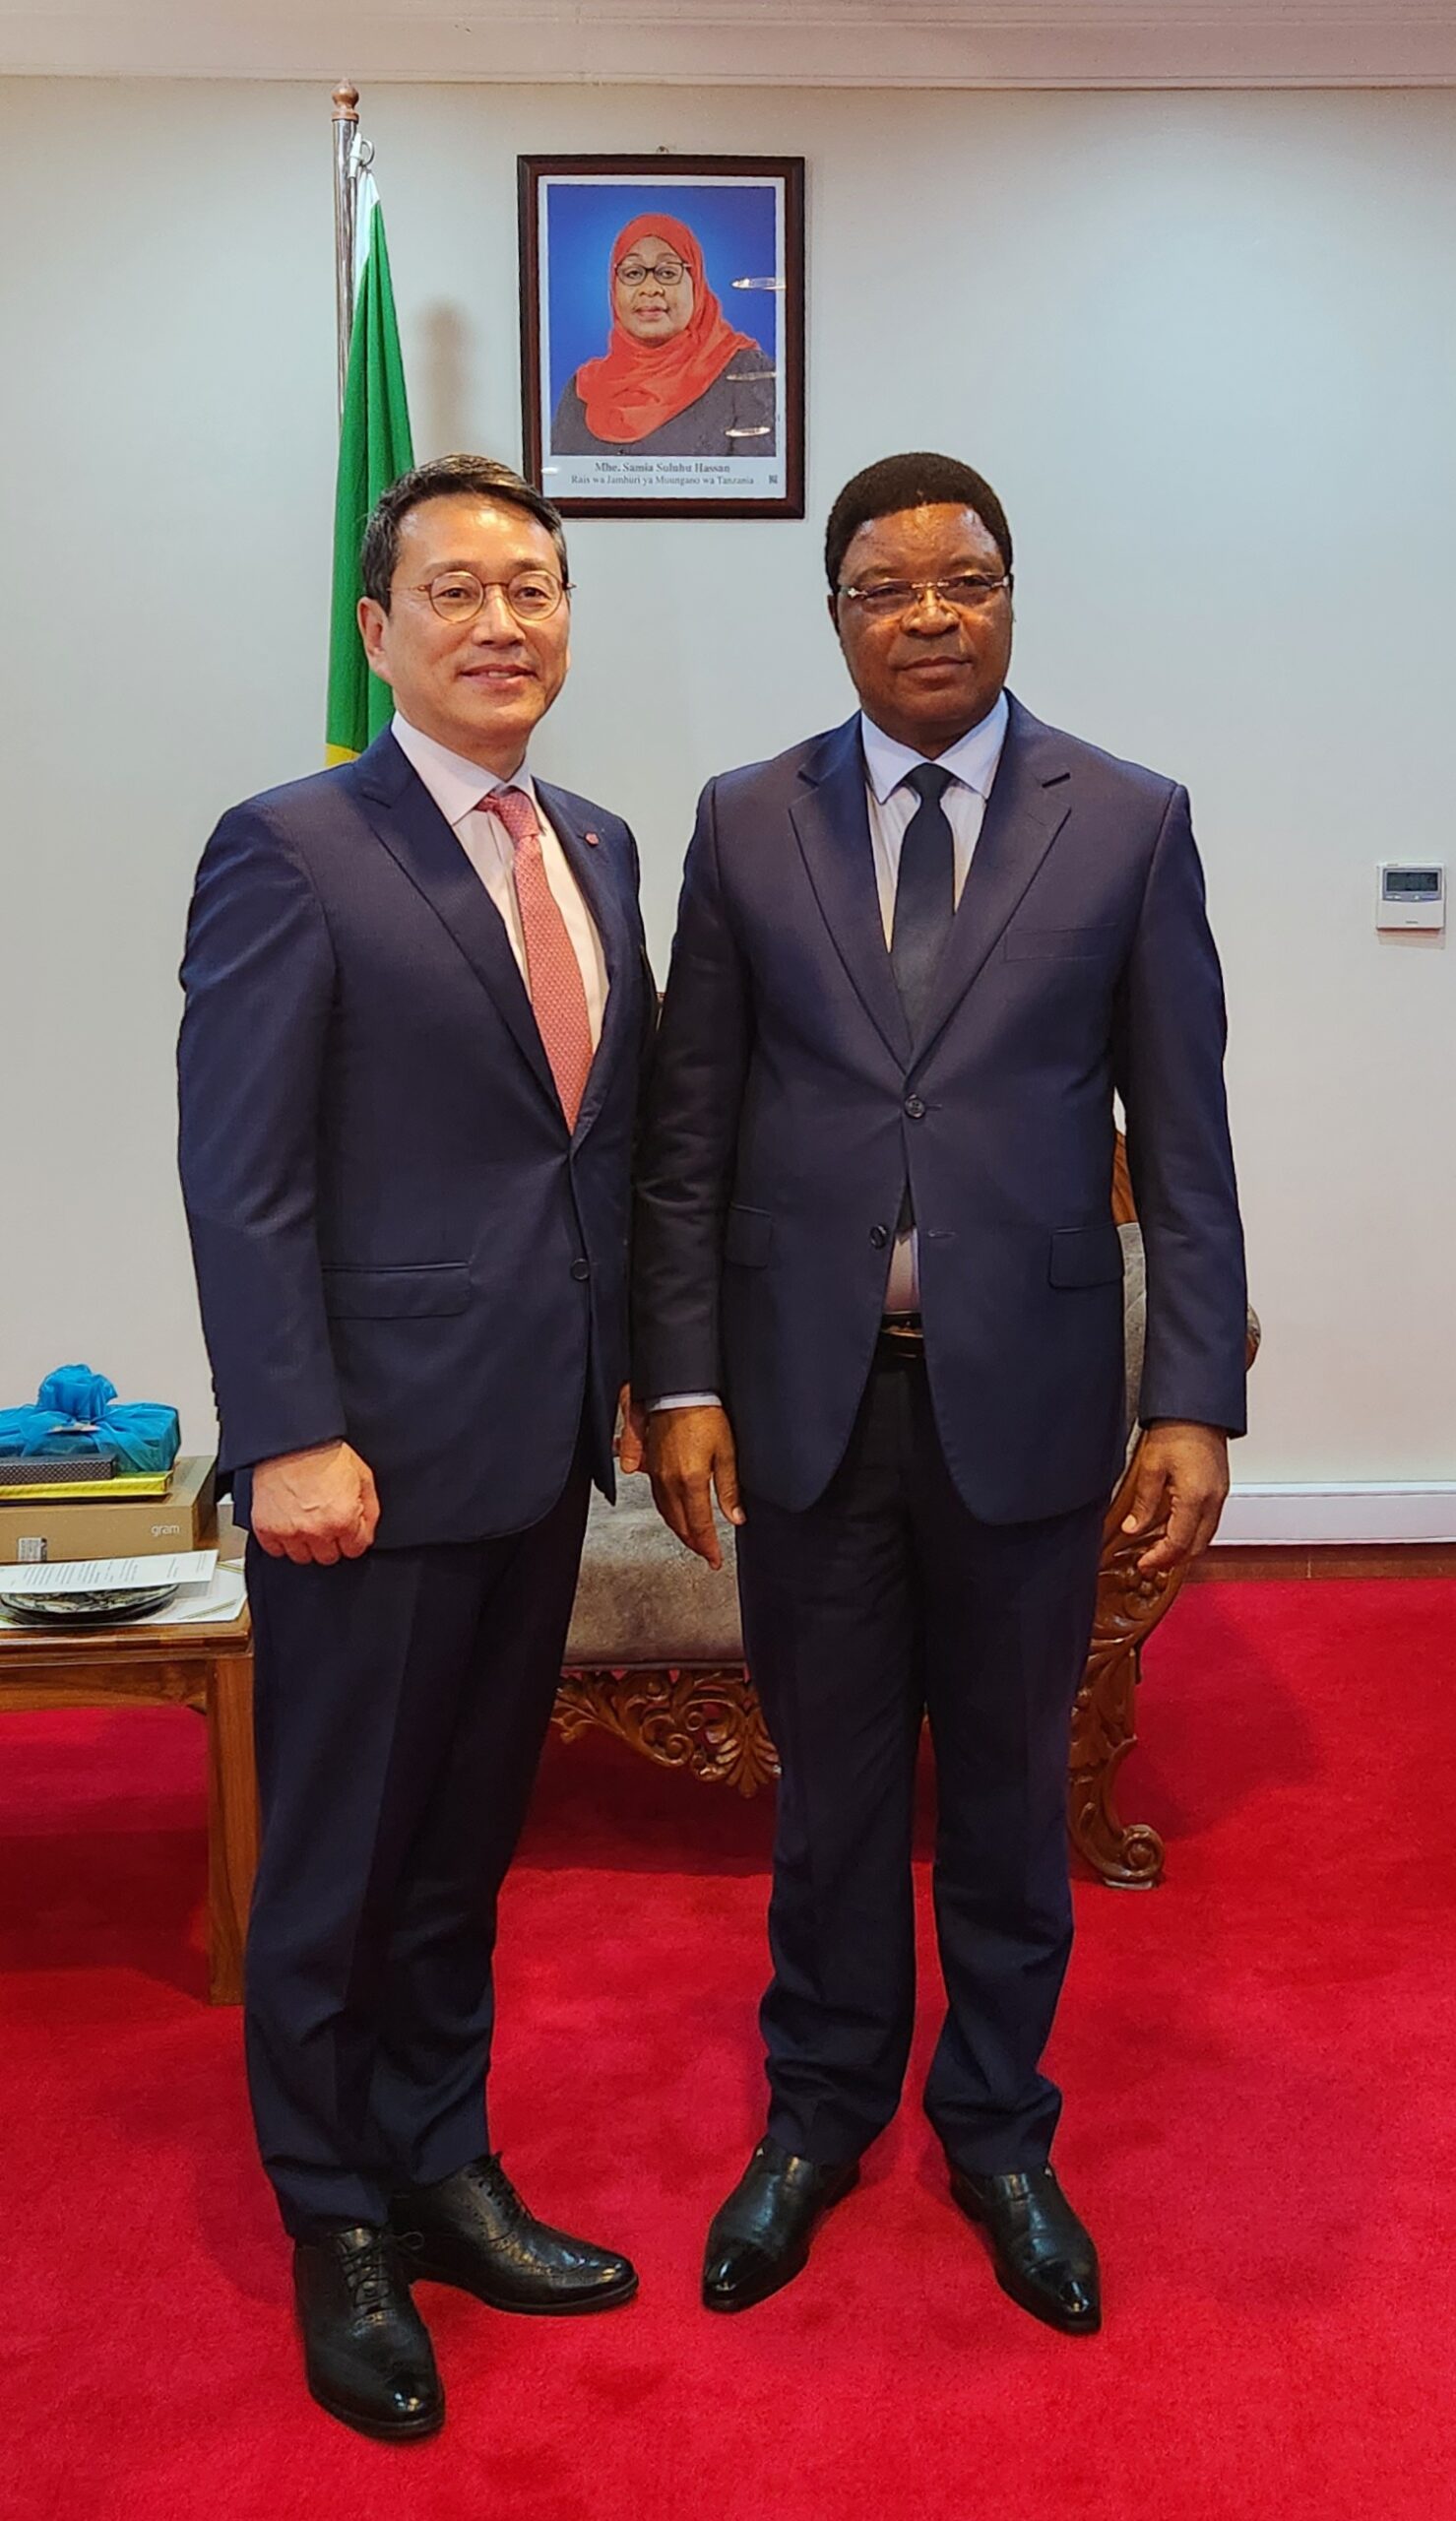 Mr. Cho and Kassim Majaliwa, Prime Minister of Tanzania, posing together for a picture